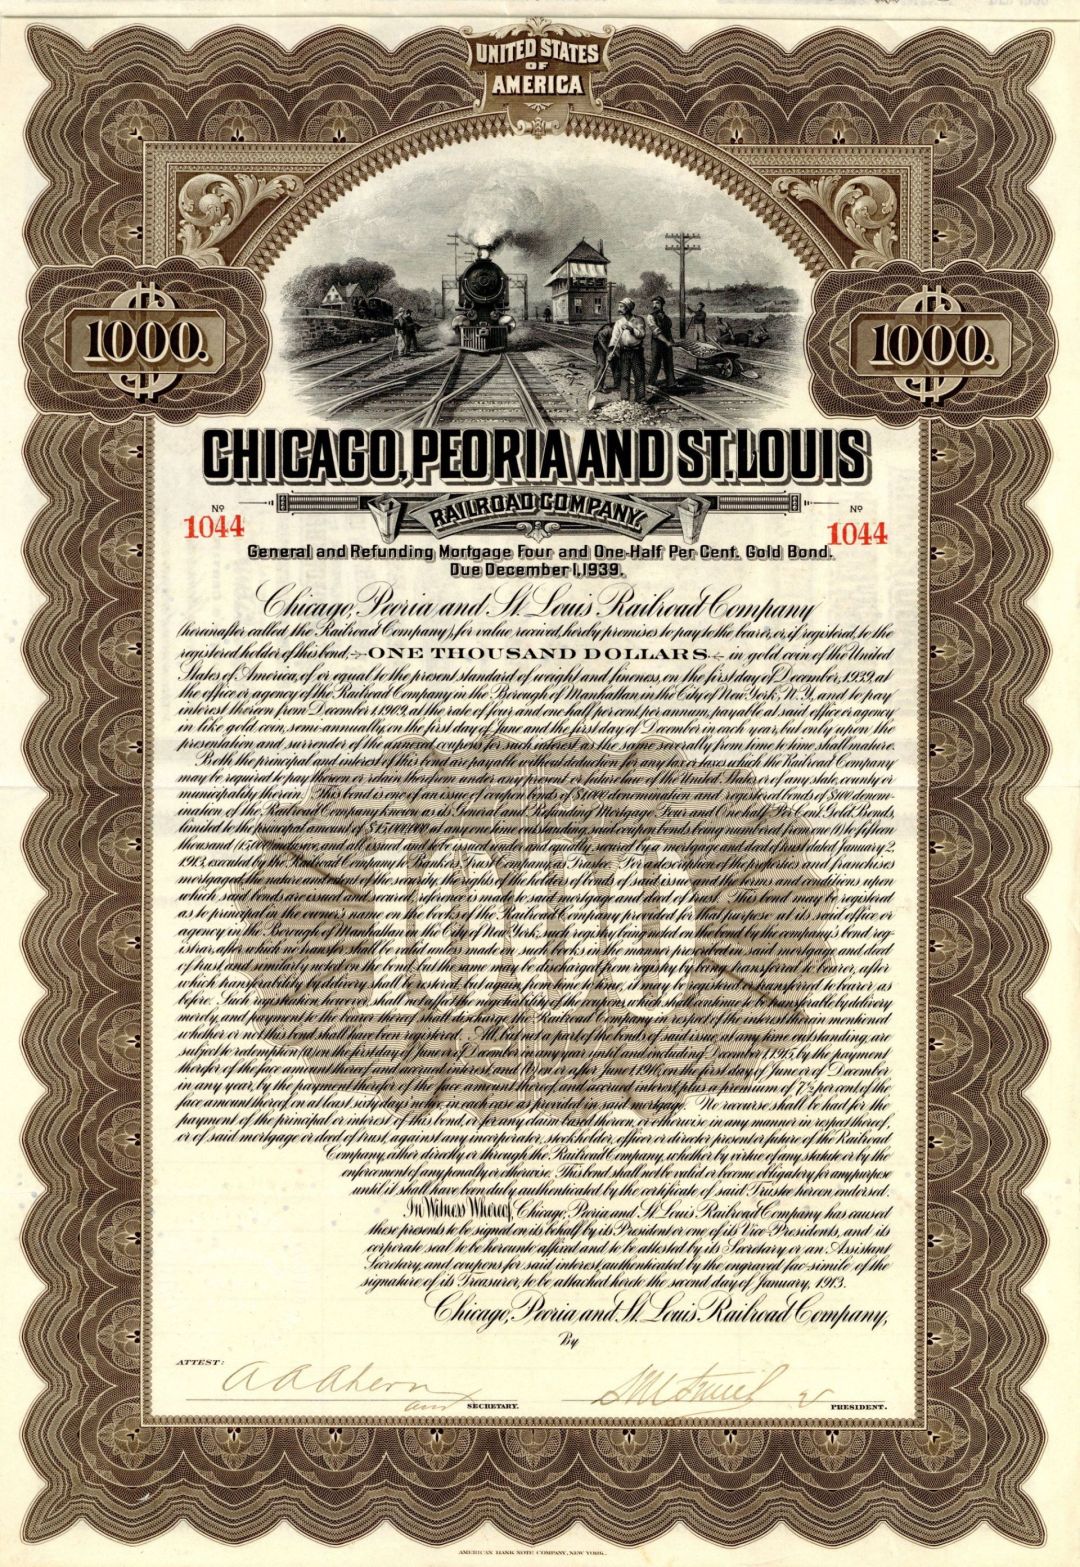 Chicago, Peoria and St. Louis Railroad Co. - $1,000 Bond dated 1913